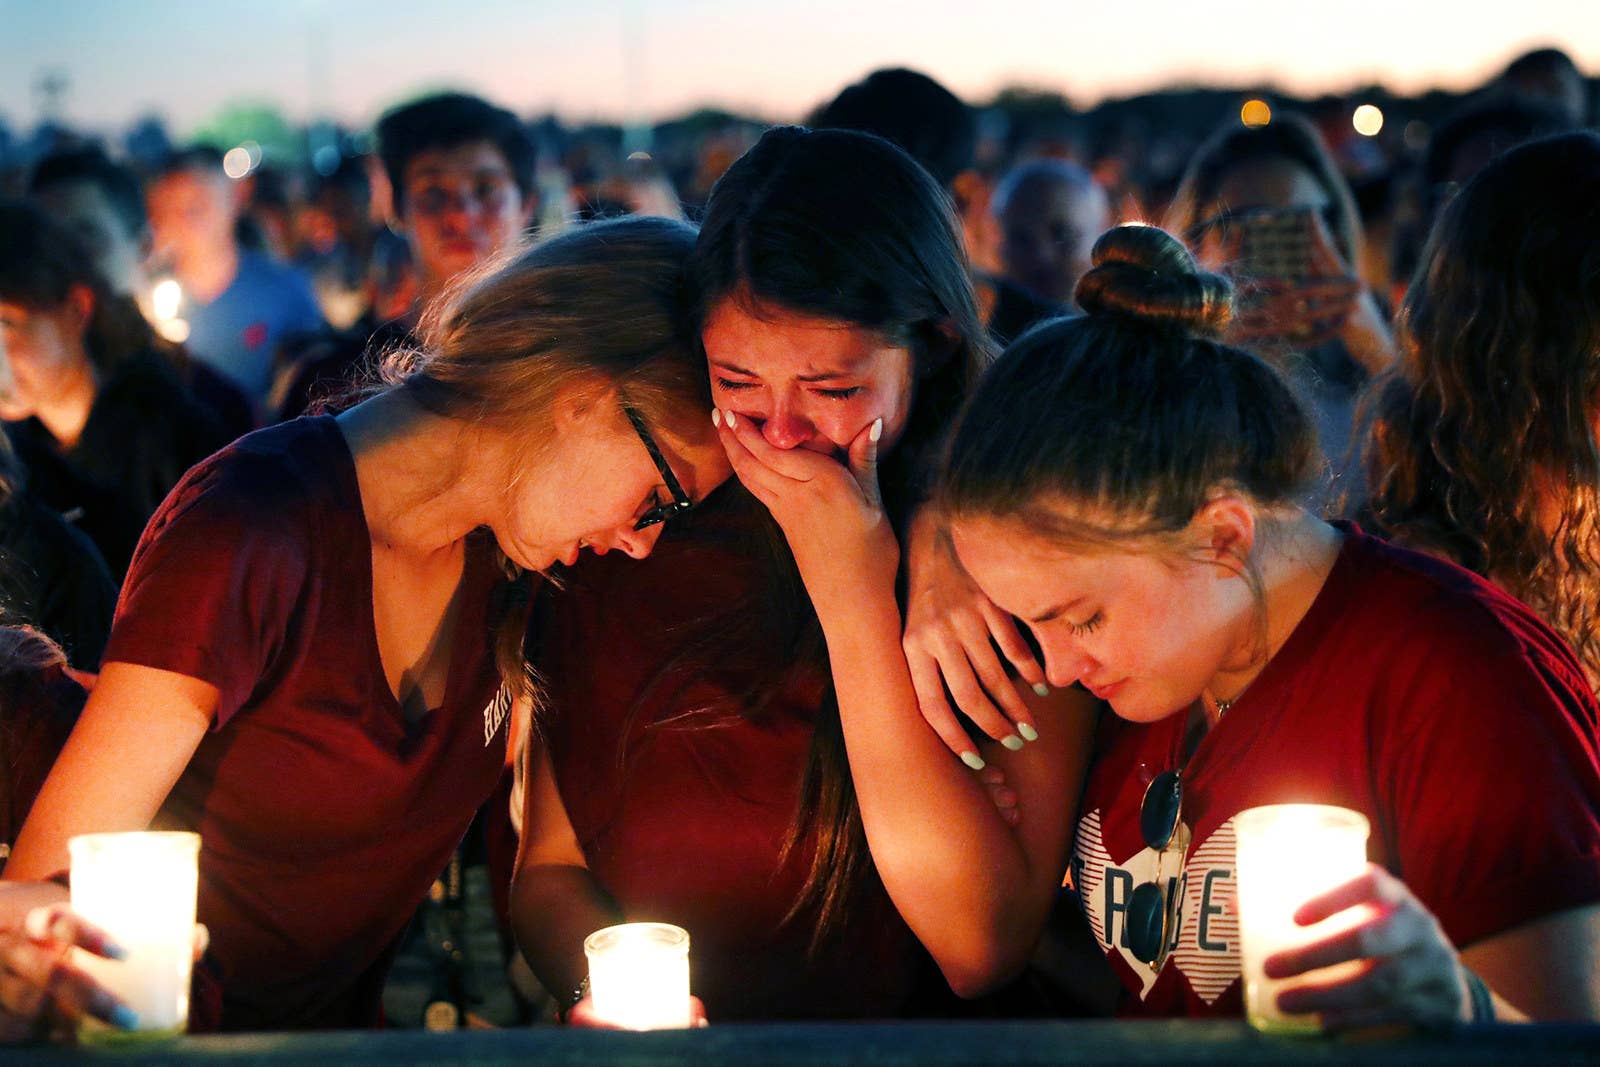 Students console each other during a candlelight vigil on Feb. 15 for the victims of the shooting at Marjory Stoneman Douglas High School.